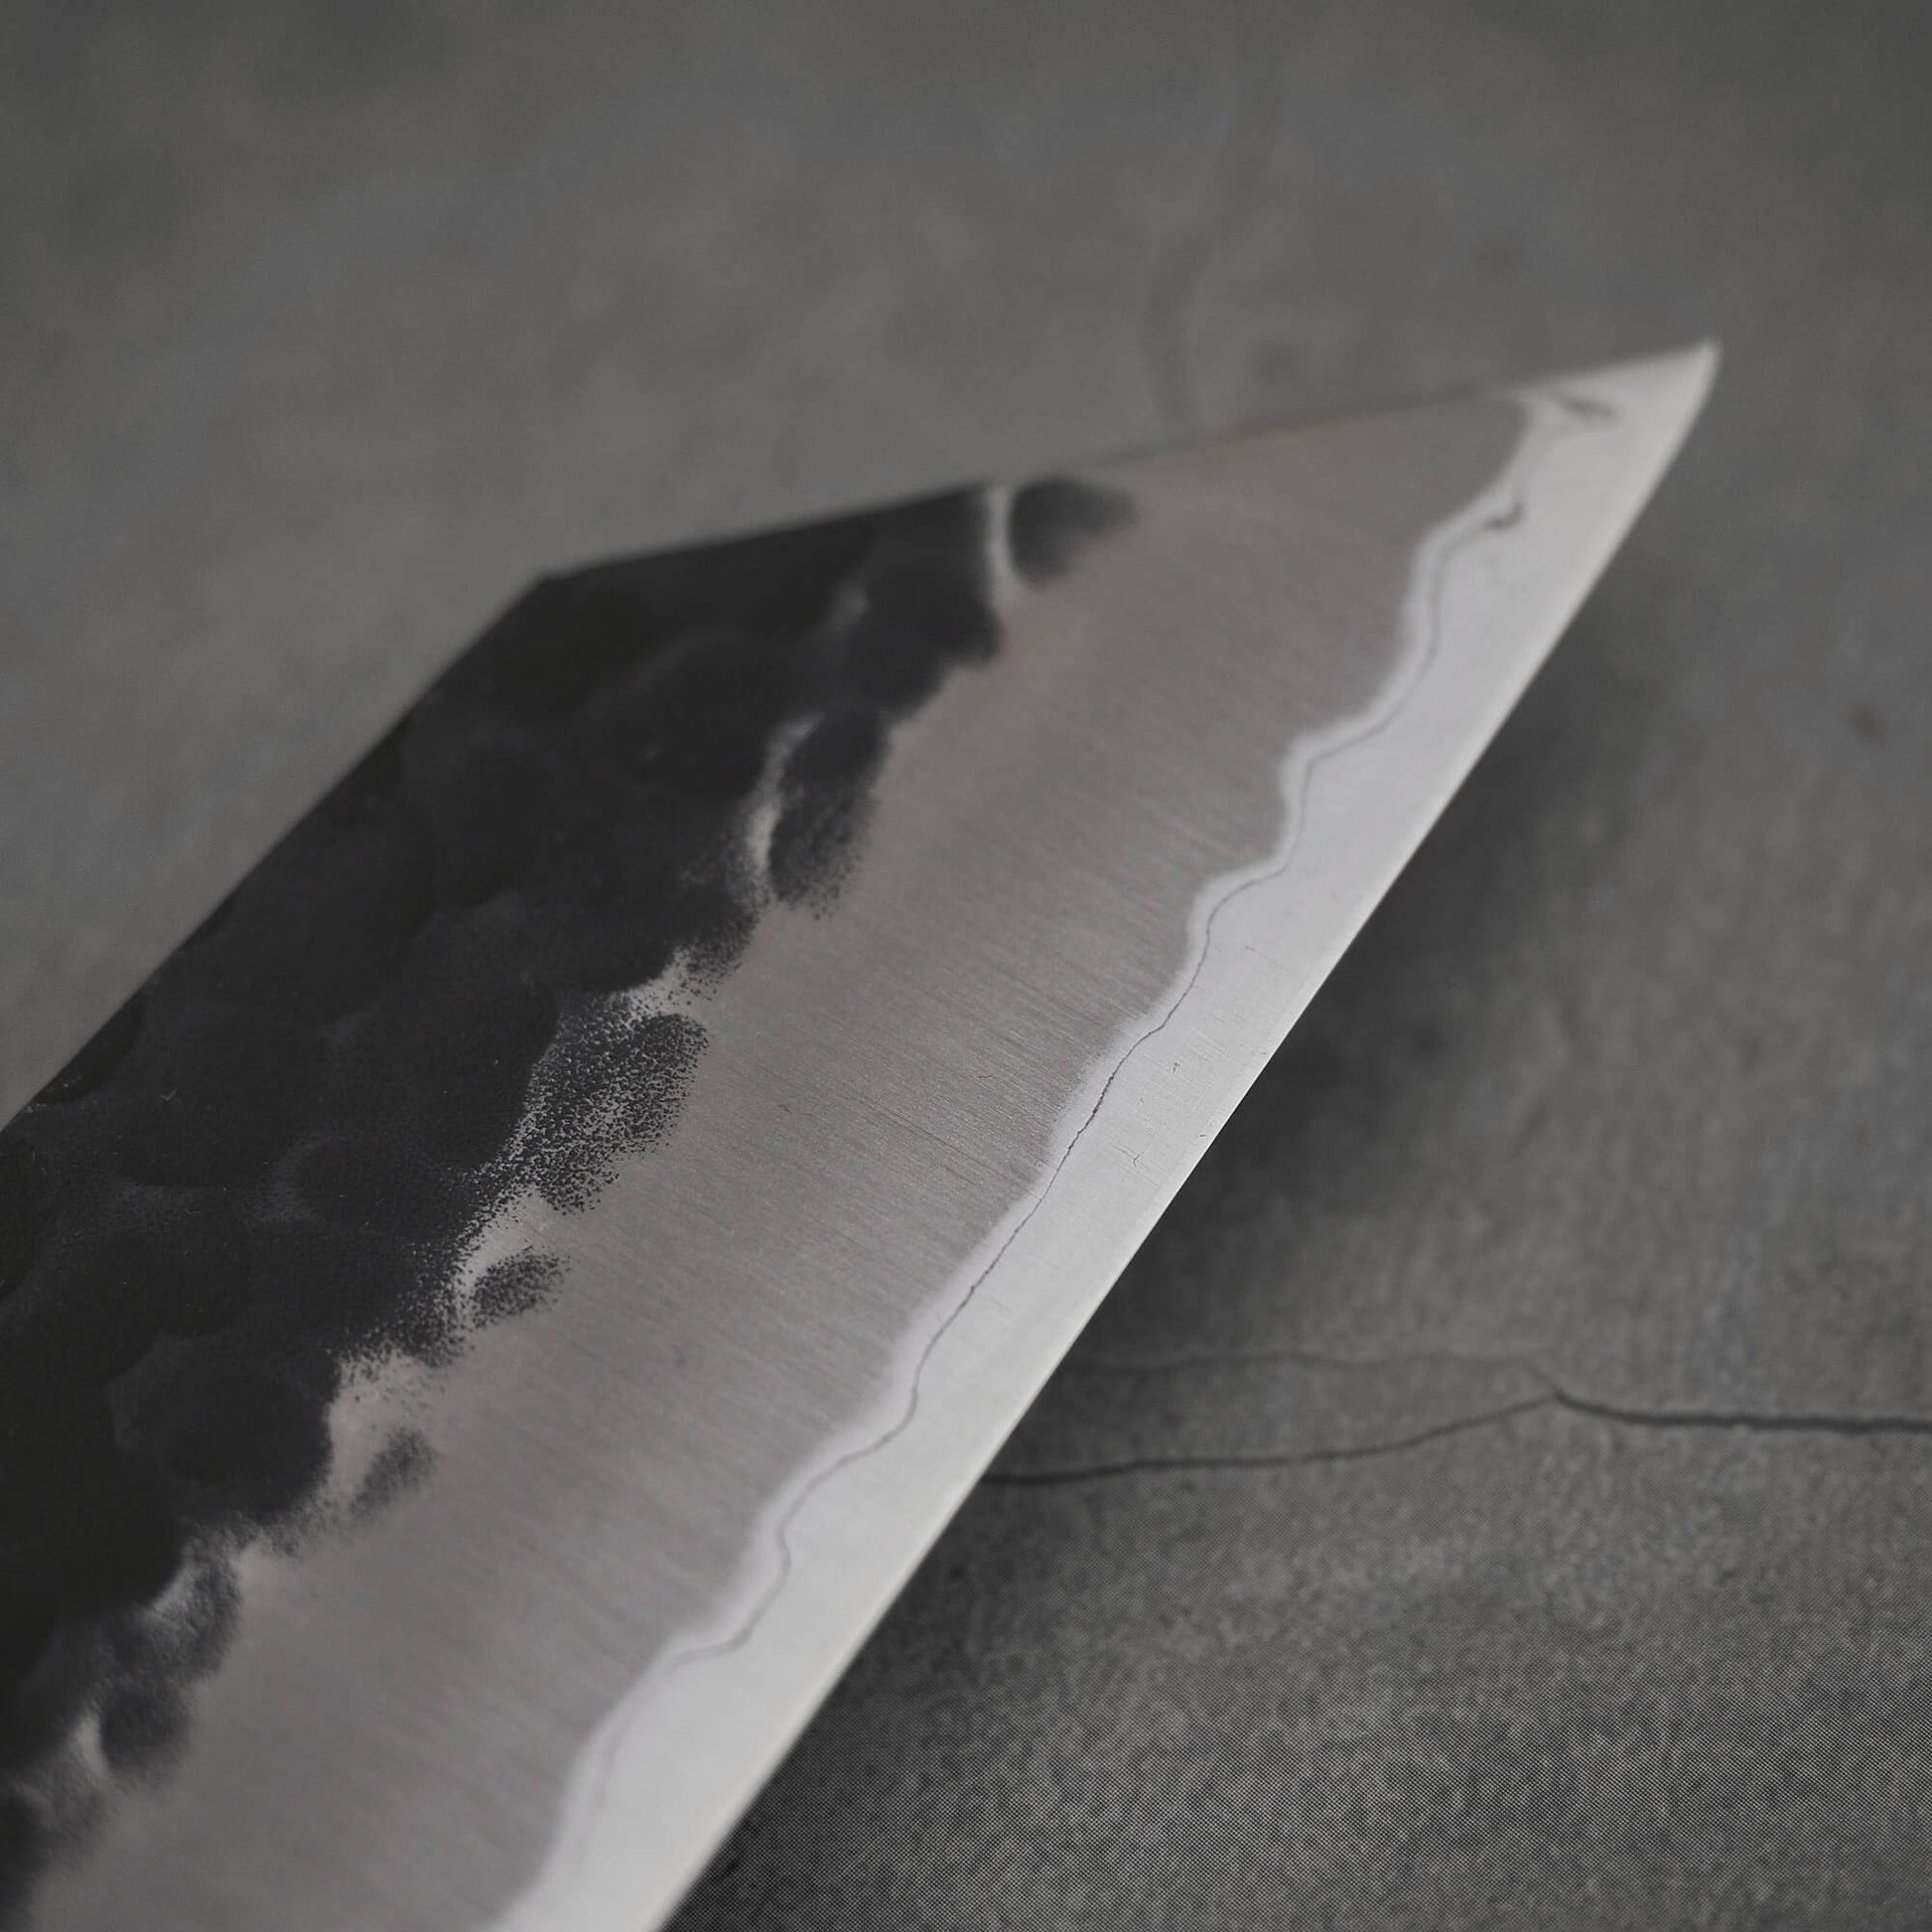 Close up view of Ittosai Kotetsu tsuchime kurouchi aogami super kiritsuke gyuto. Image focuses on the tip area of the right side of the blade